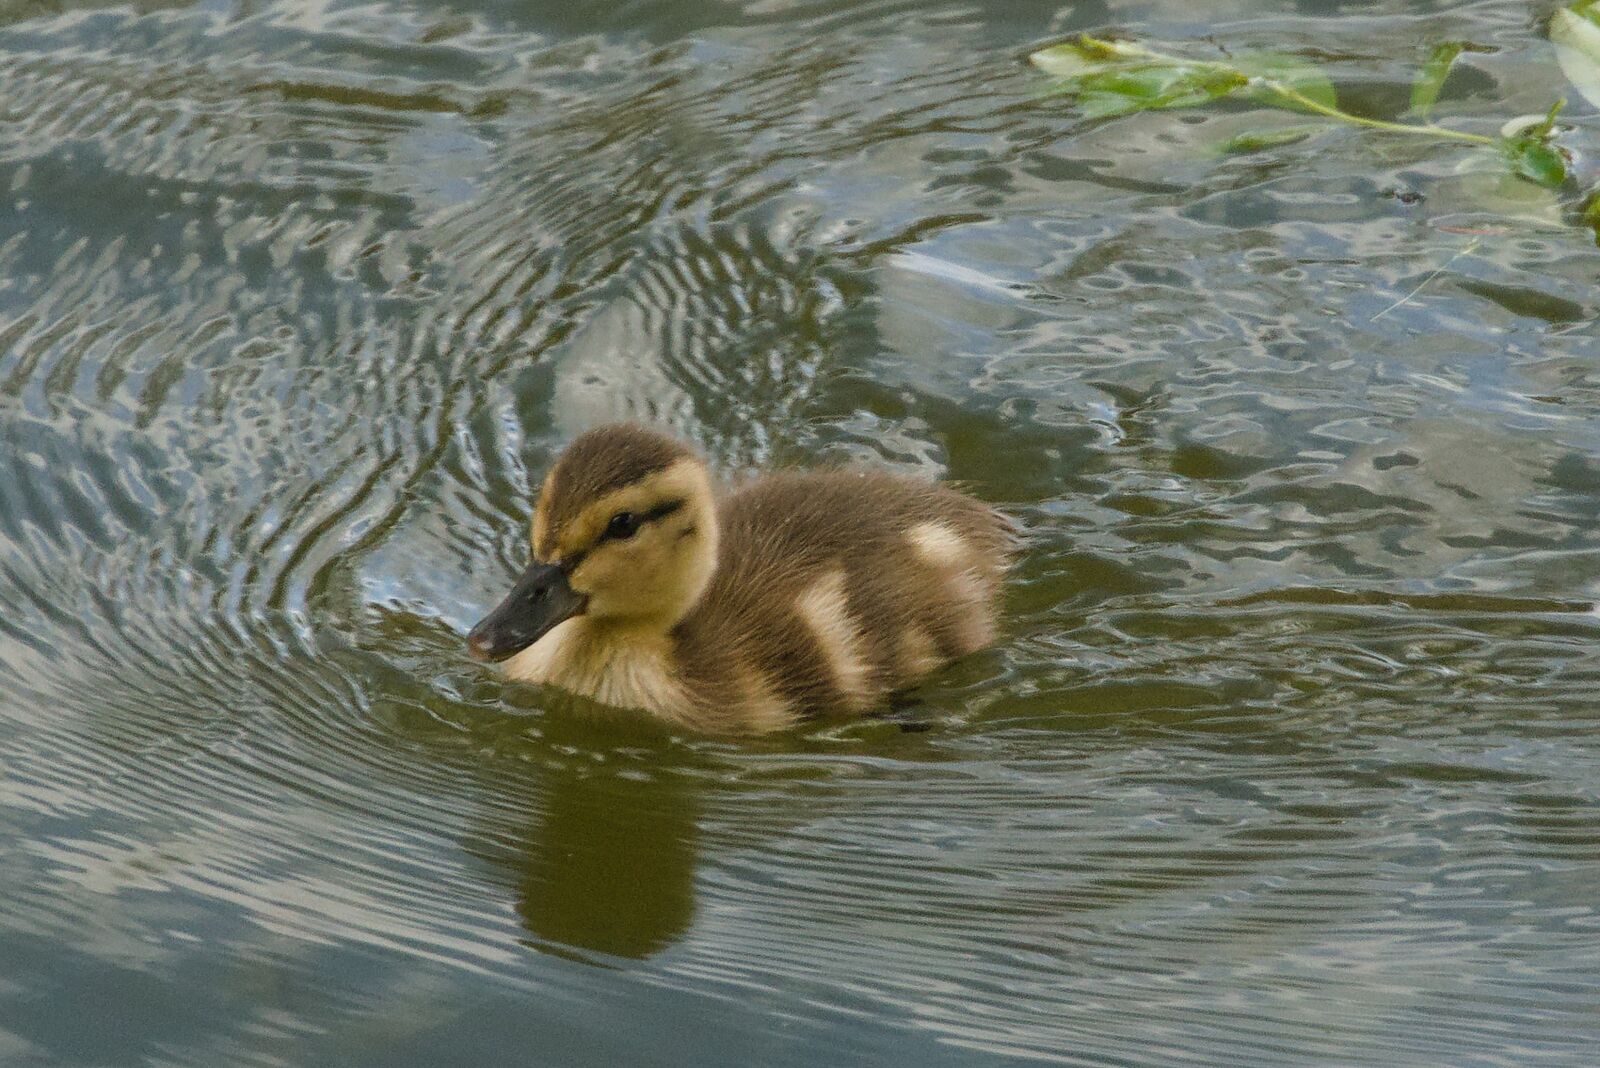 Sony a6400 sample photo. Duck, duckling, nature photography